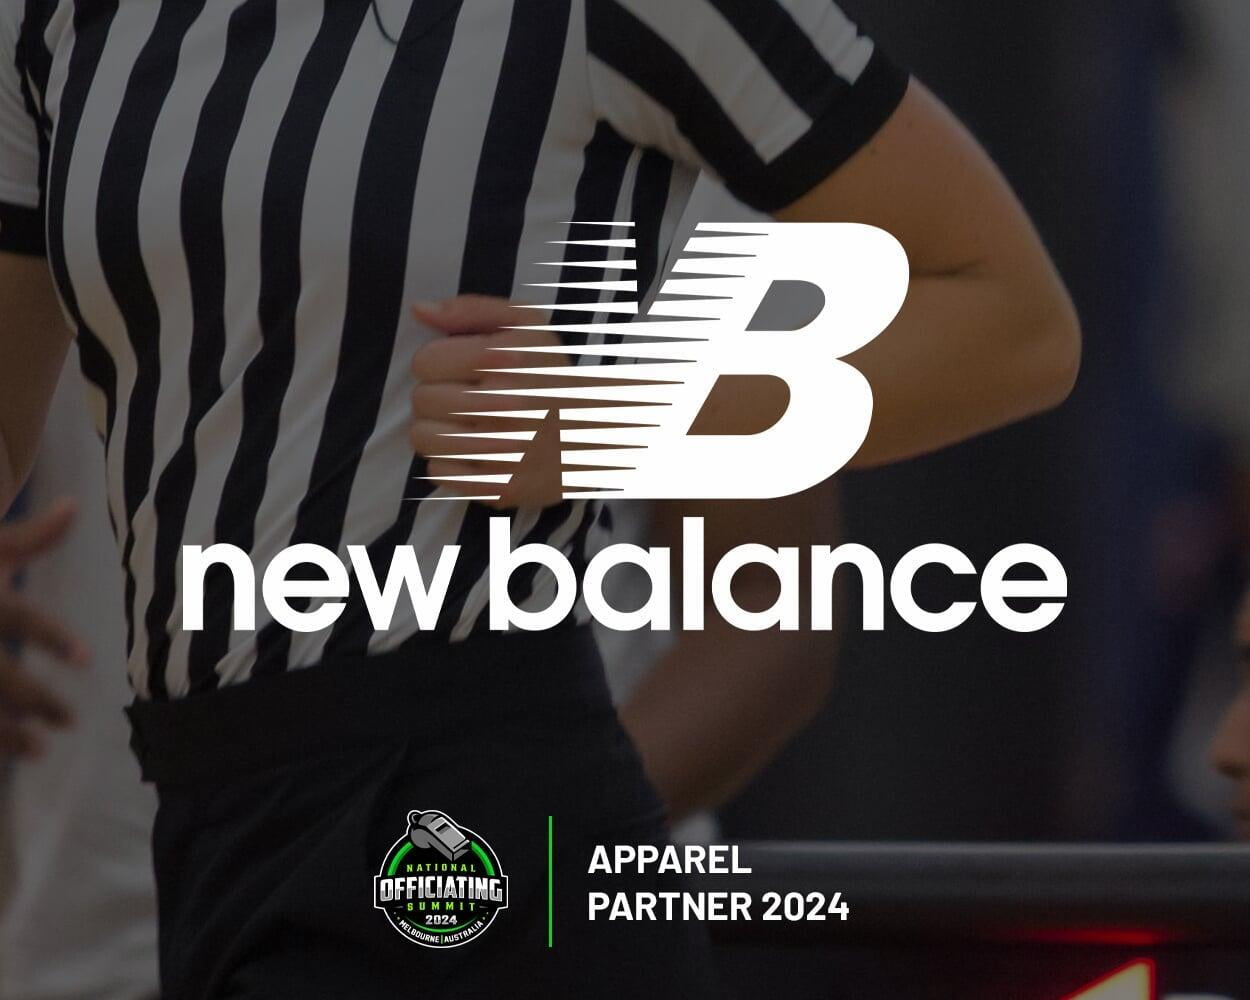 NEW BALANCE / BELGRAVIA APPAREL PARTNER WITH NATIONAL OFFICIATING SUMMIT